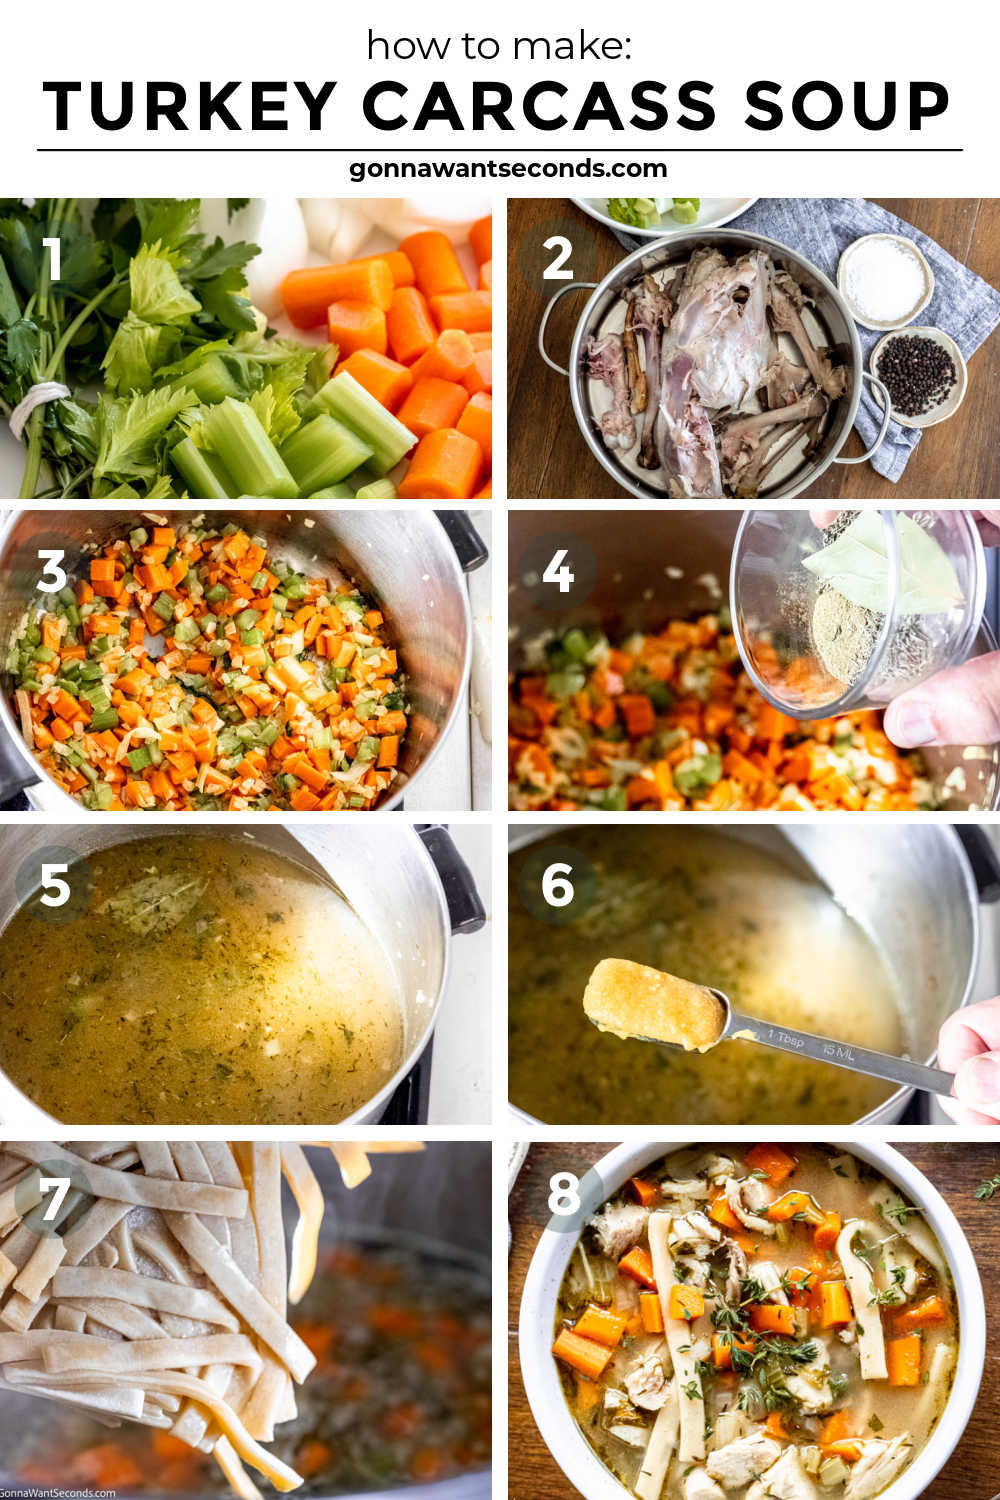 Step by step how to make turkey carcass soup